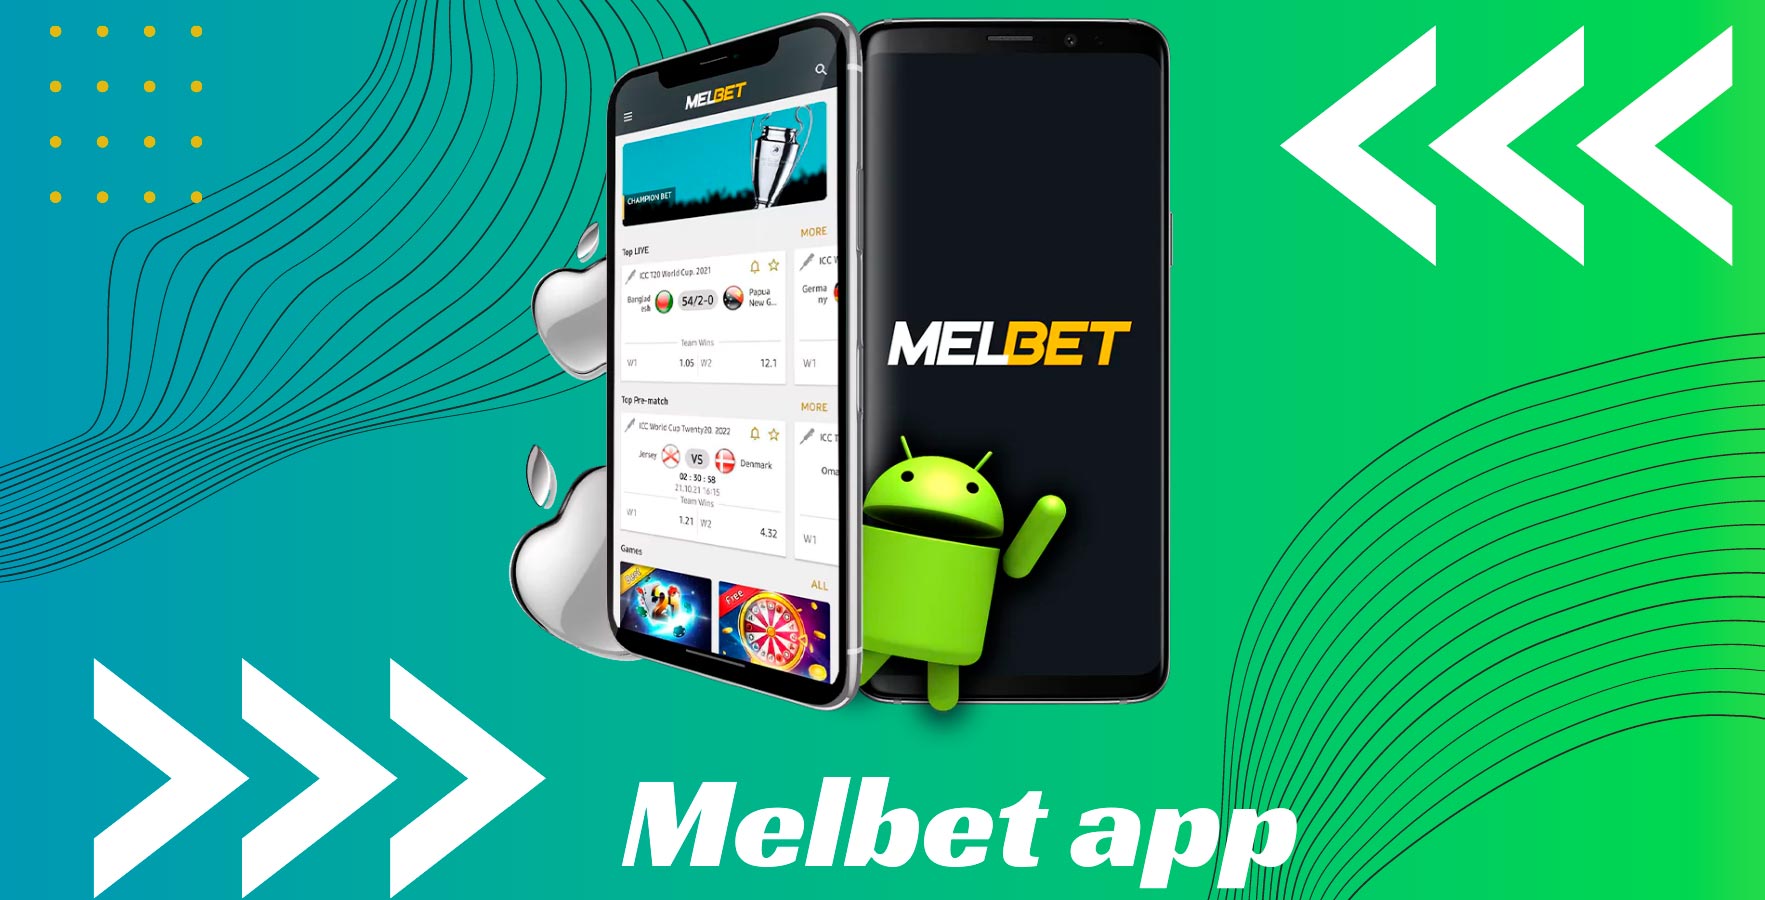 Melbet betting app is one of the most famous betting apps